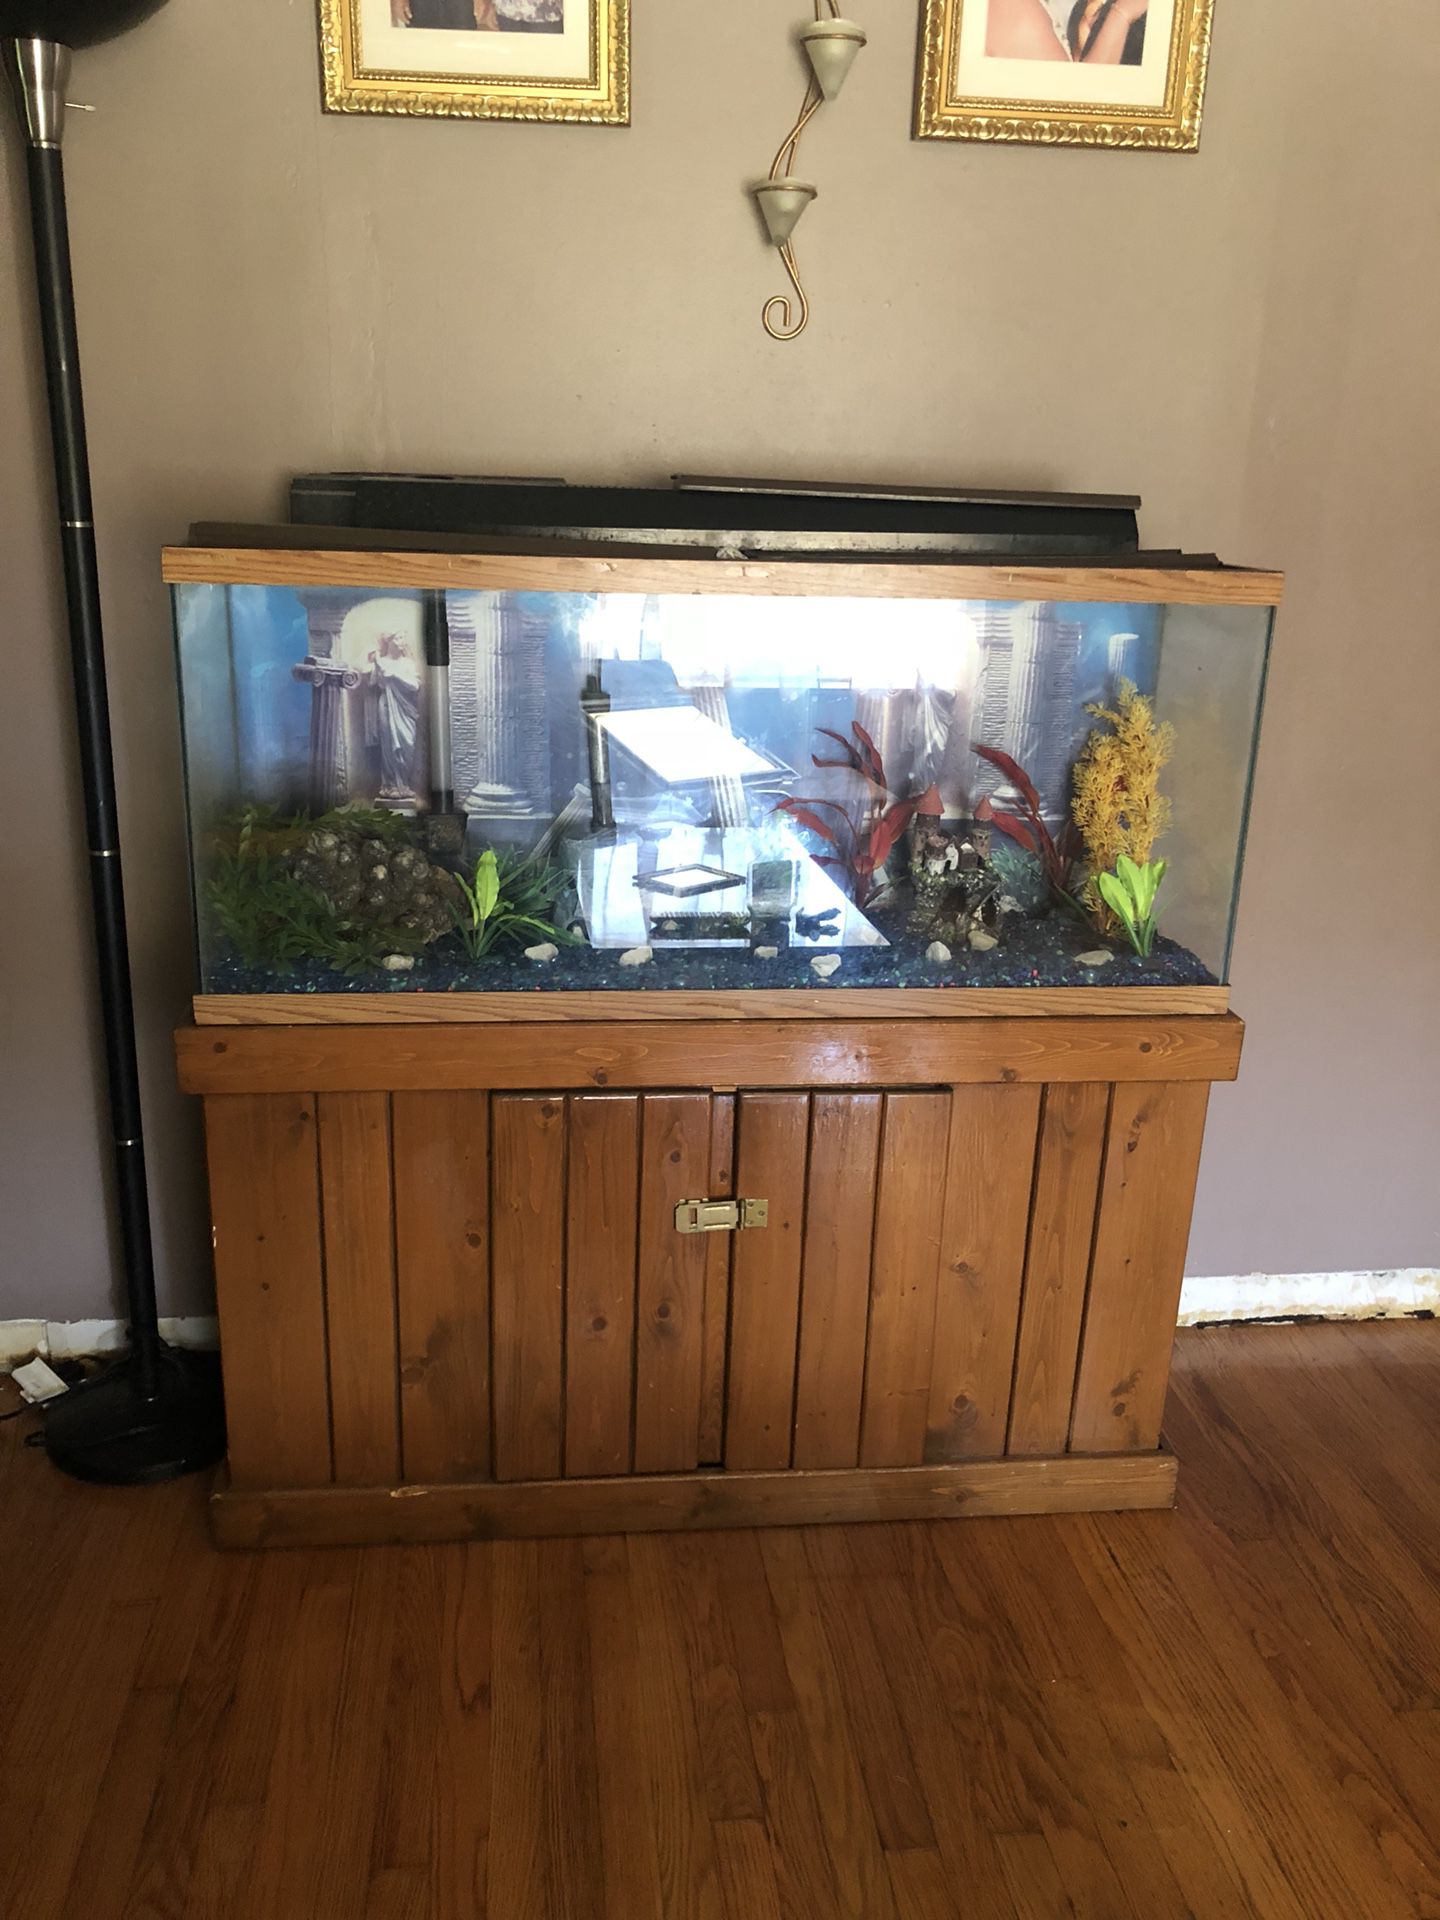 Fish tank 57 gallons with decorations included